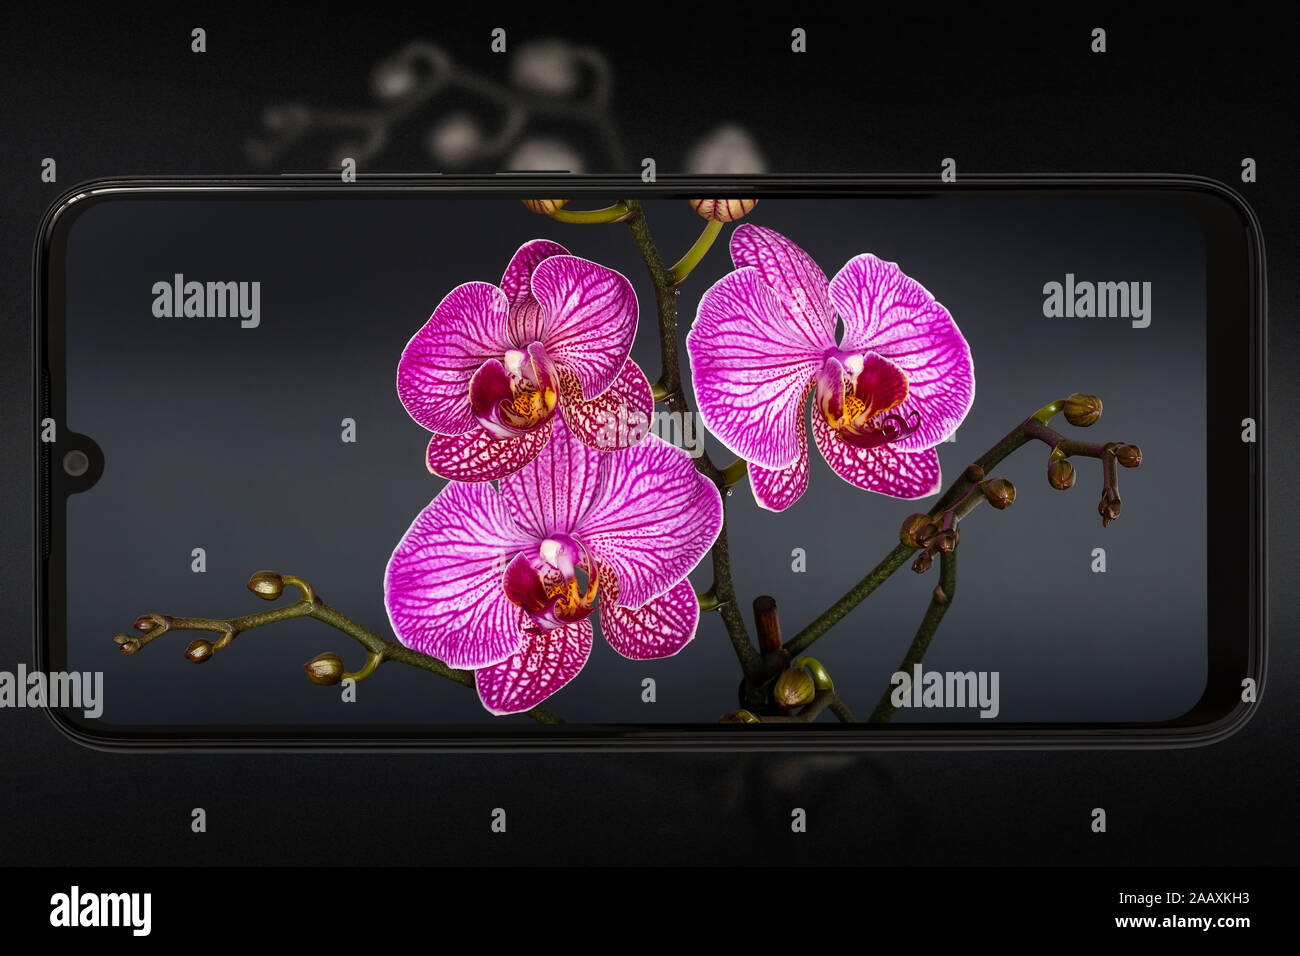 Purple orchids in the frame of a mobile phone as a photograph. The concept of a flower photograph. Stock Photo